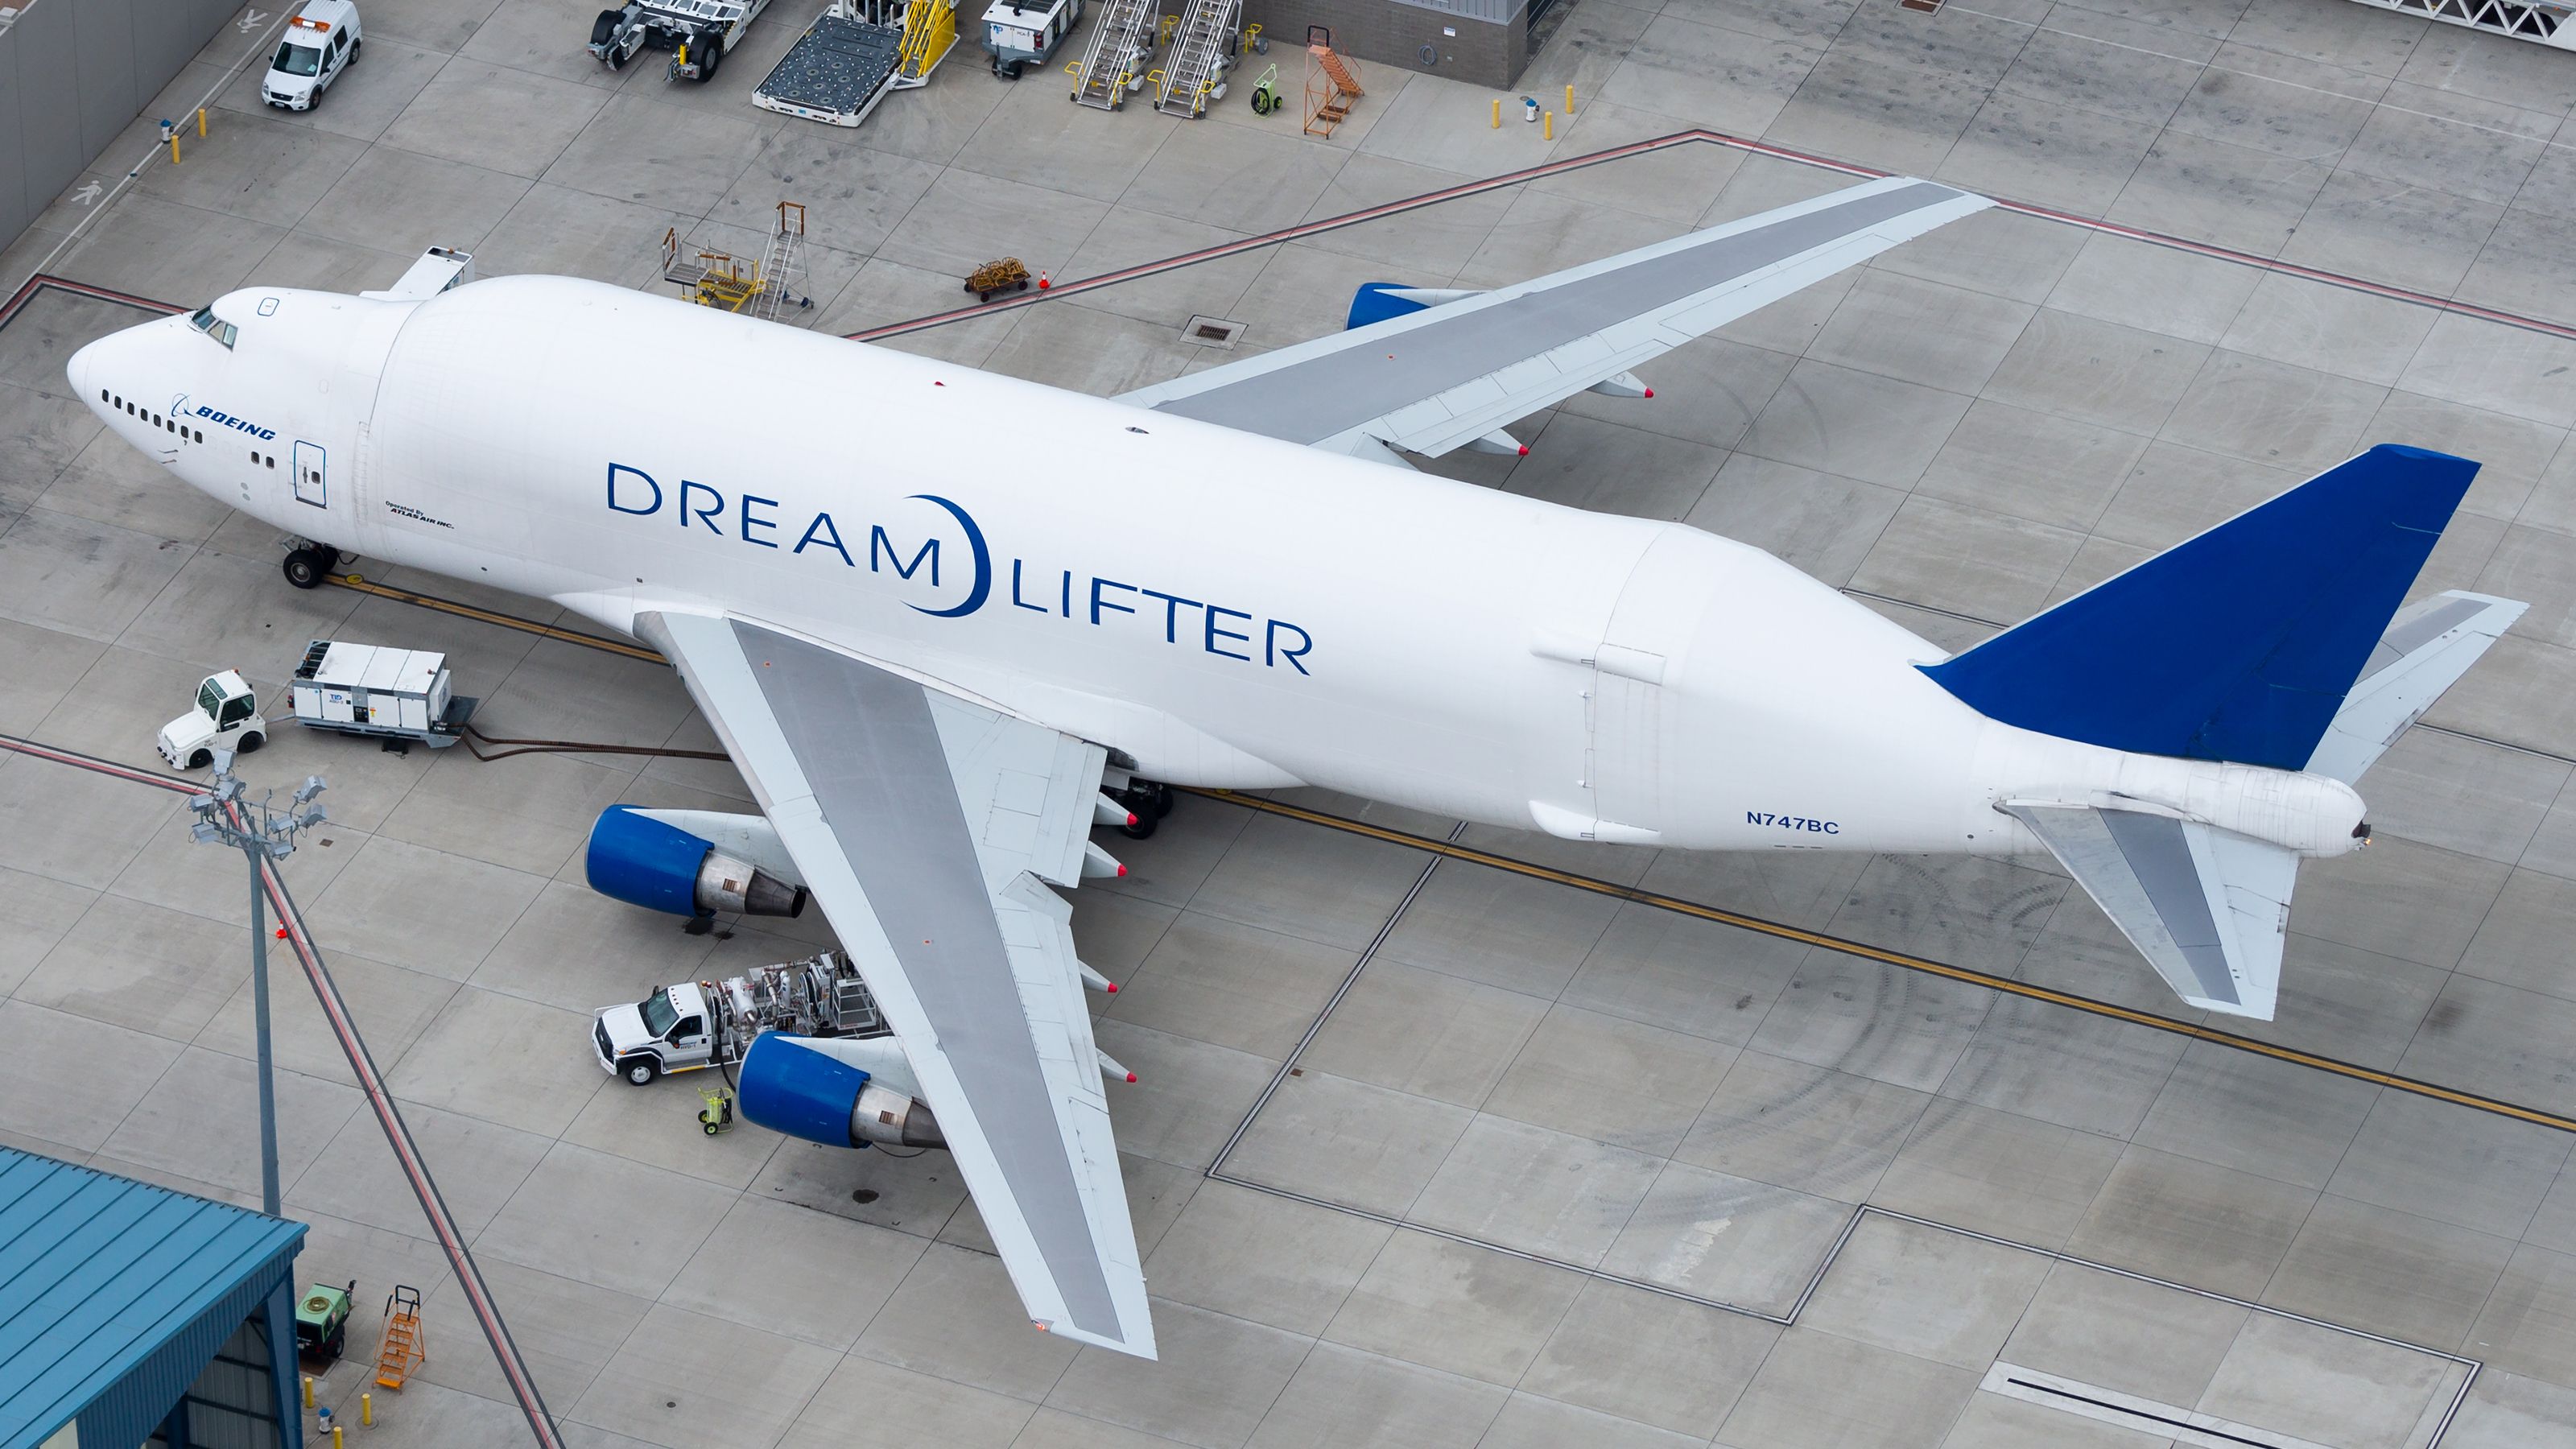 A Boeing Dreamlifter parked at an airport.